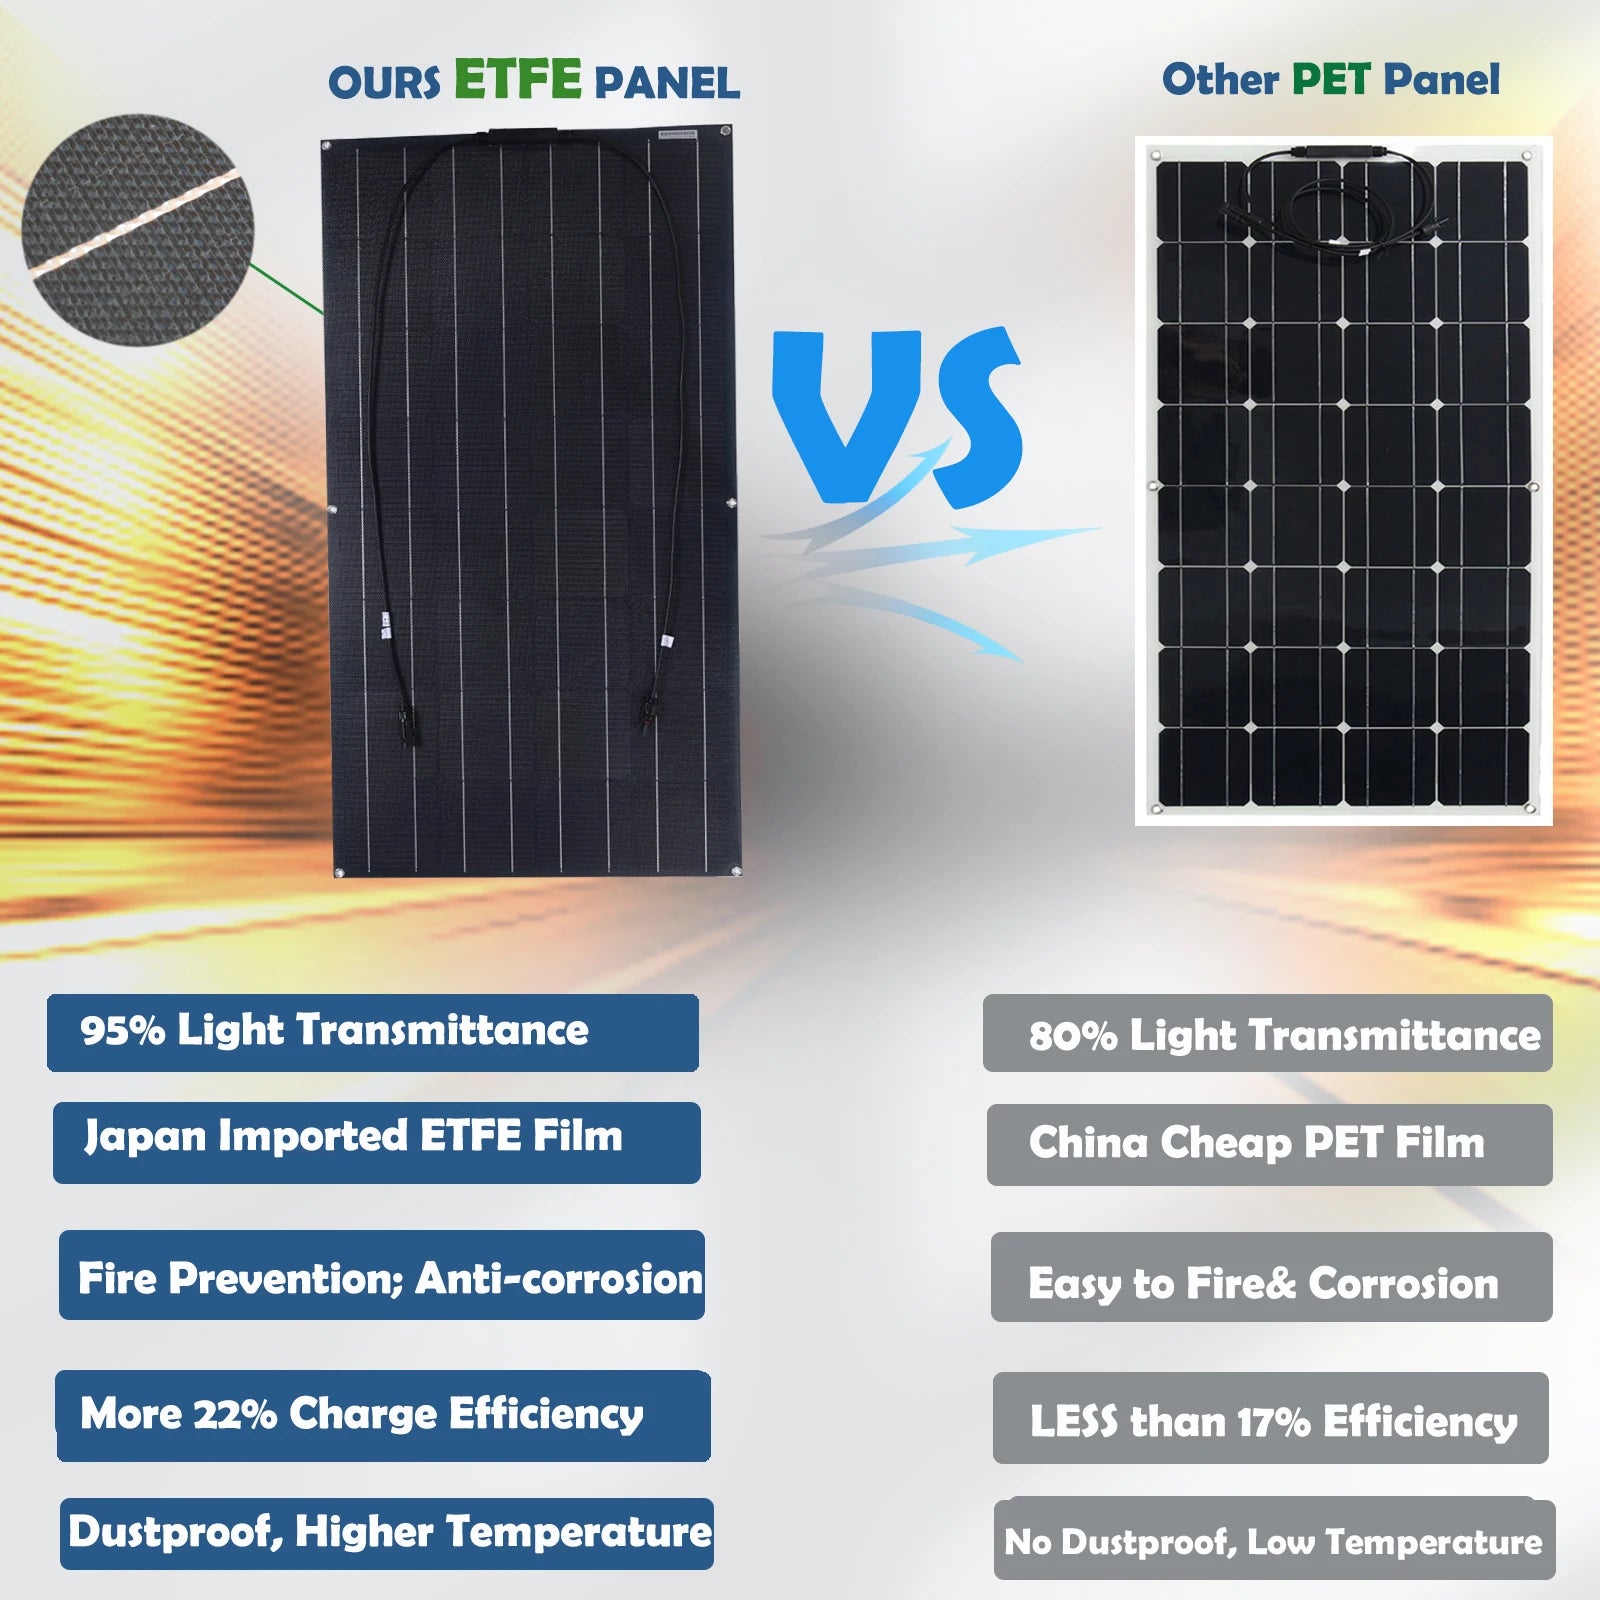 Jingyang Solar Panel, High-efficiency solar panel with 95% light transmittance and 22% efficiency from Japan.